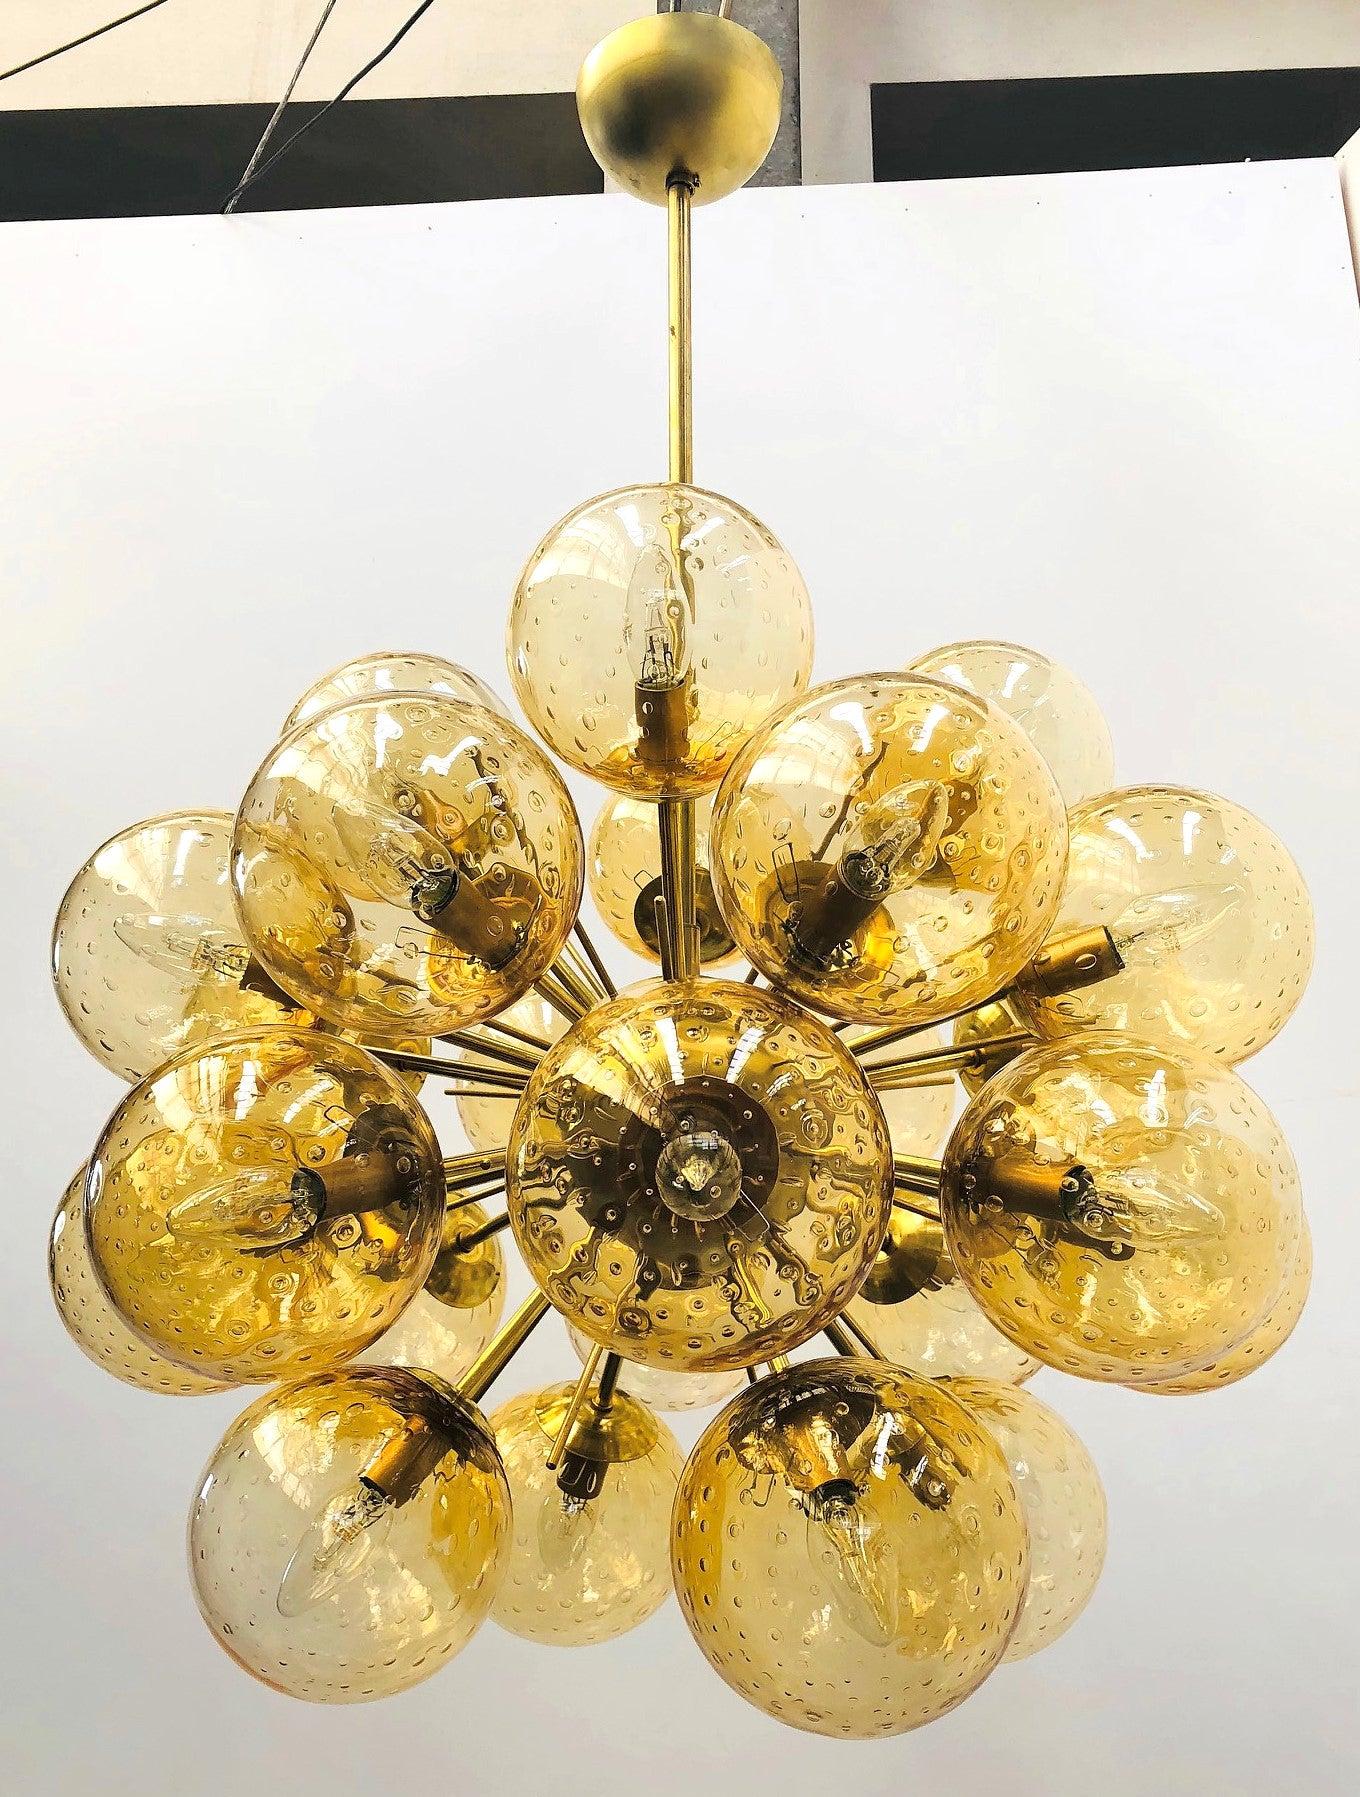 Italian sputnik chandelier with 24 Murano glass globes mounted on brass frame / Designed by Fabio Bergomi for Fabio Ltd / Made in Italy
24 lights / E12 or E14 type / max 40W each
Diameter: 28 inches / Height: 39 inches including rod and canopy
Order